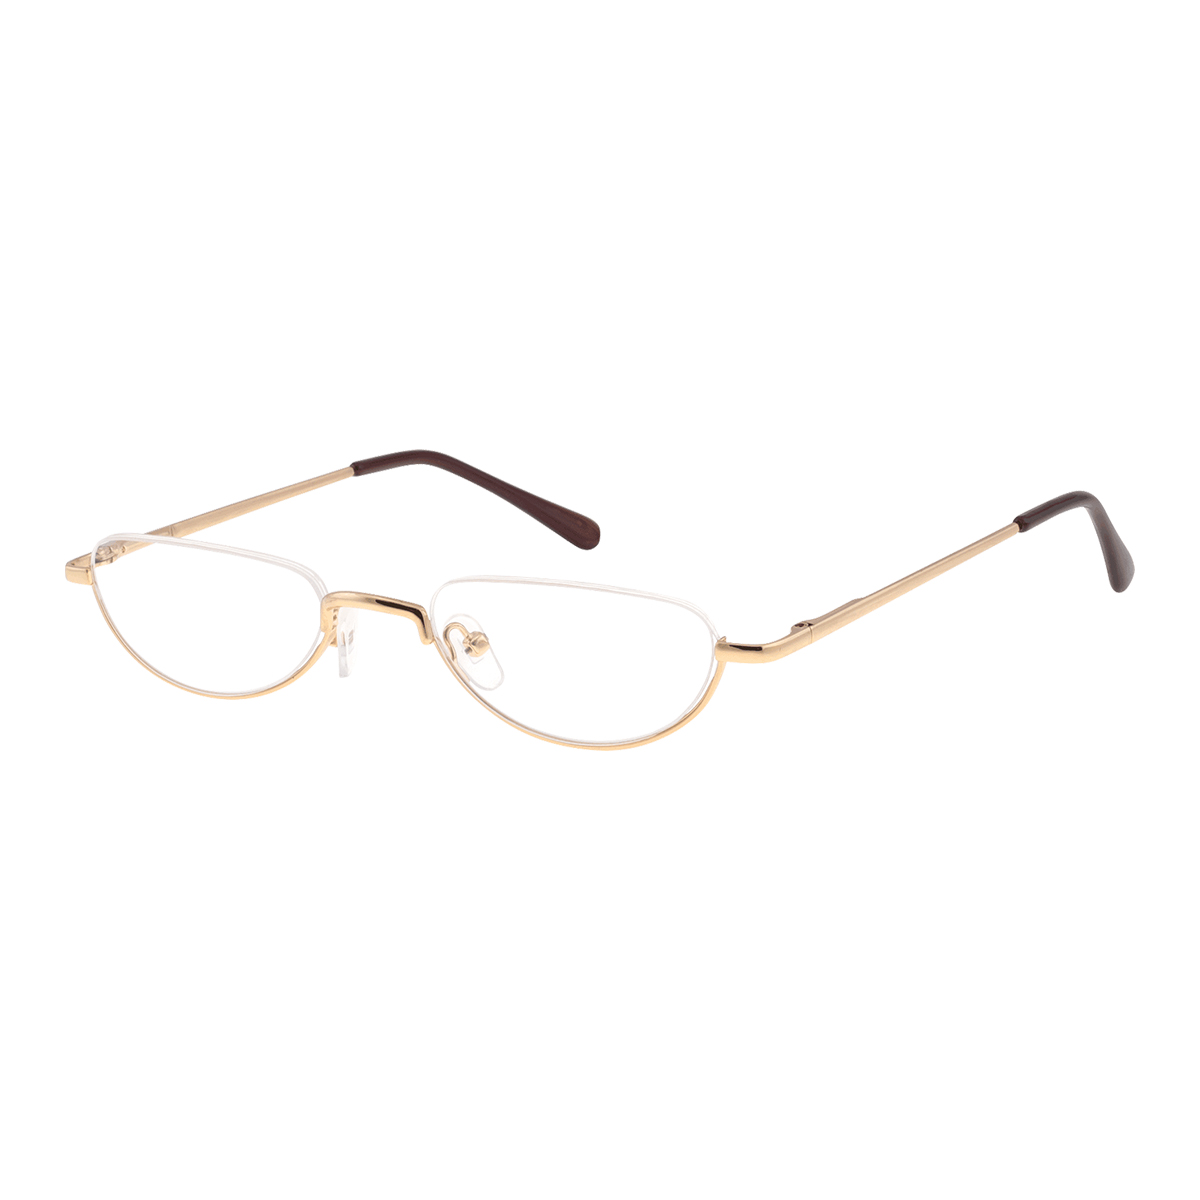 Canyon - Oval Gold Reading Glasses for Men & Women